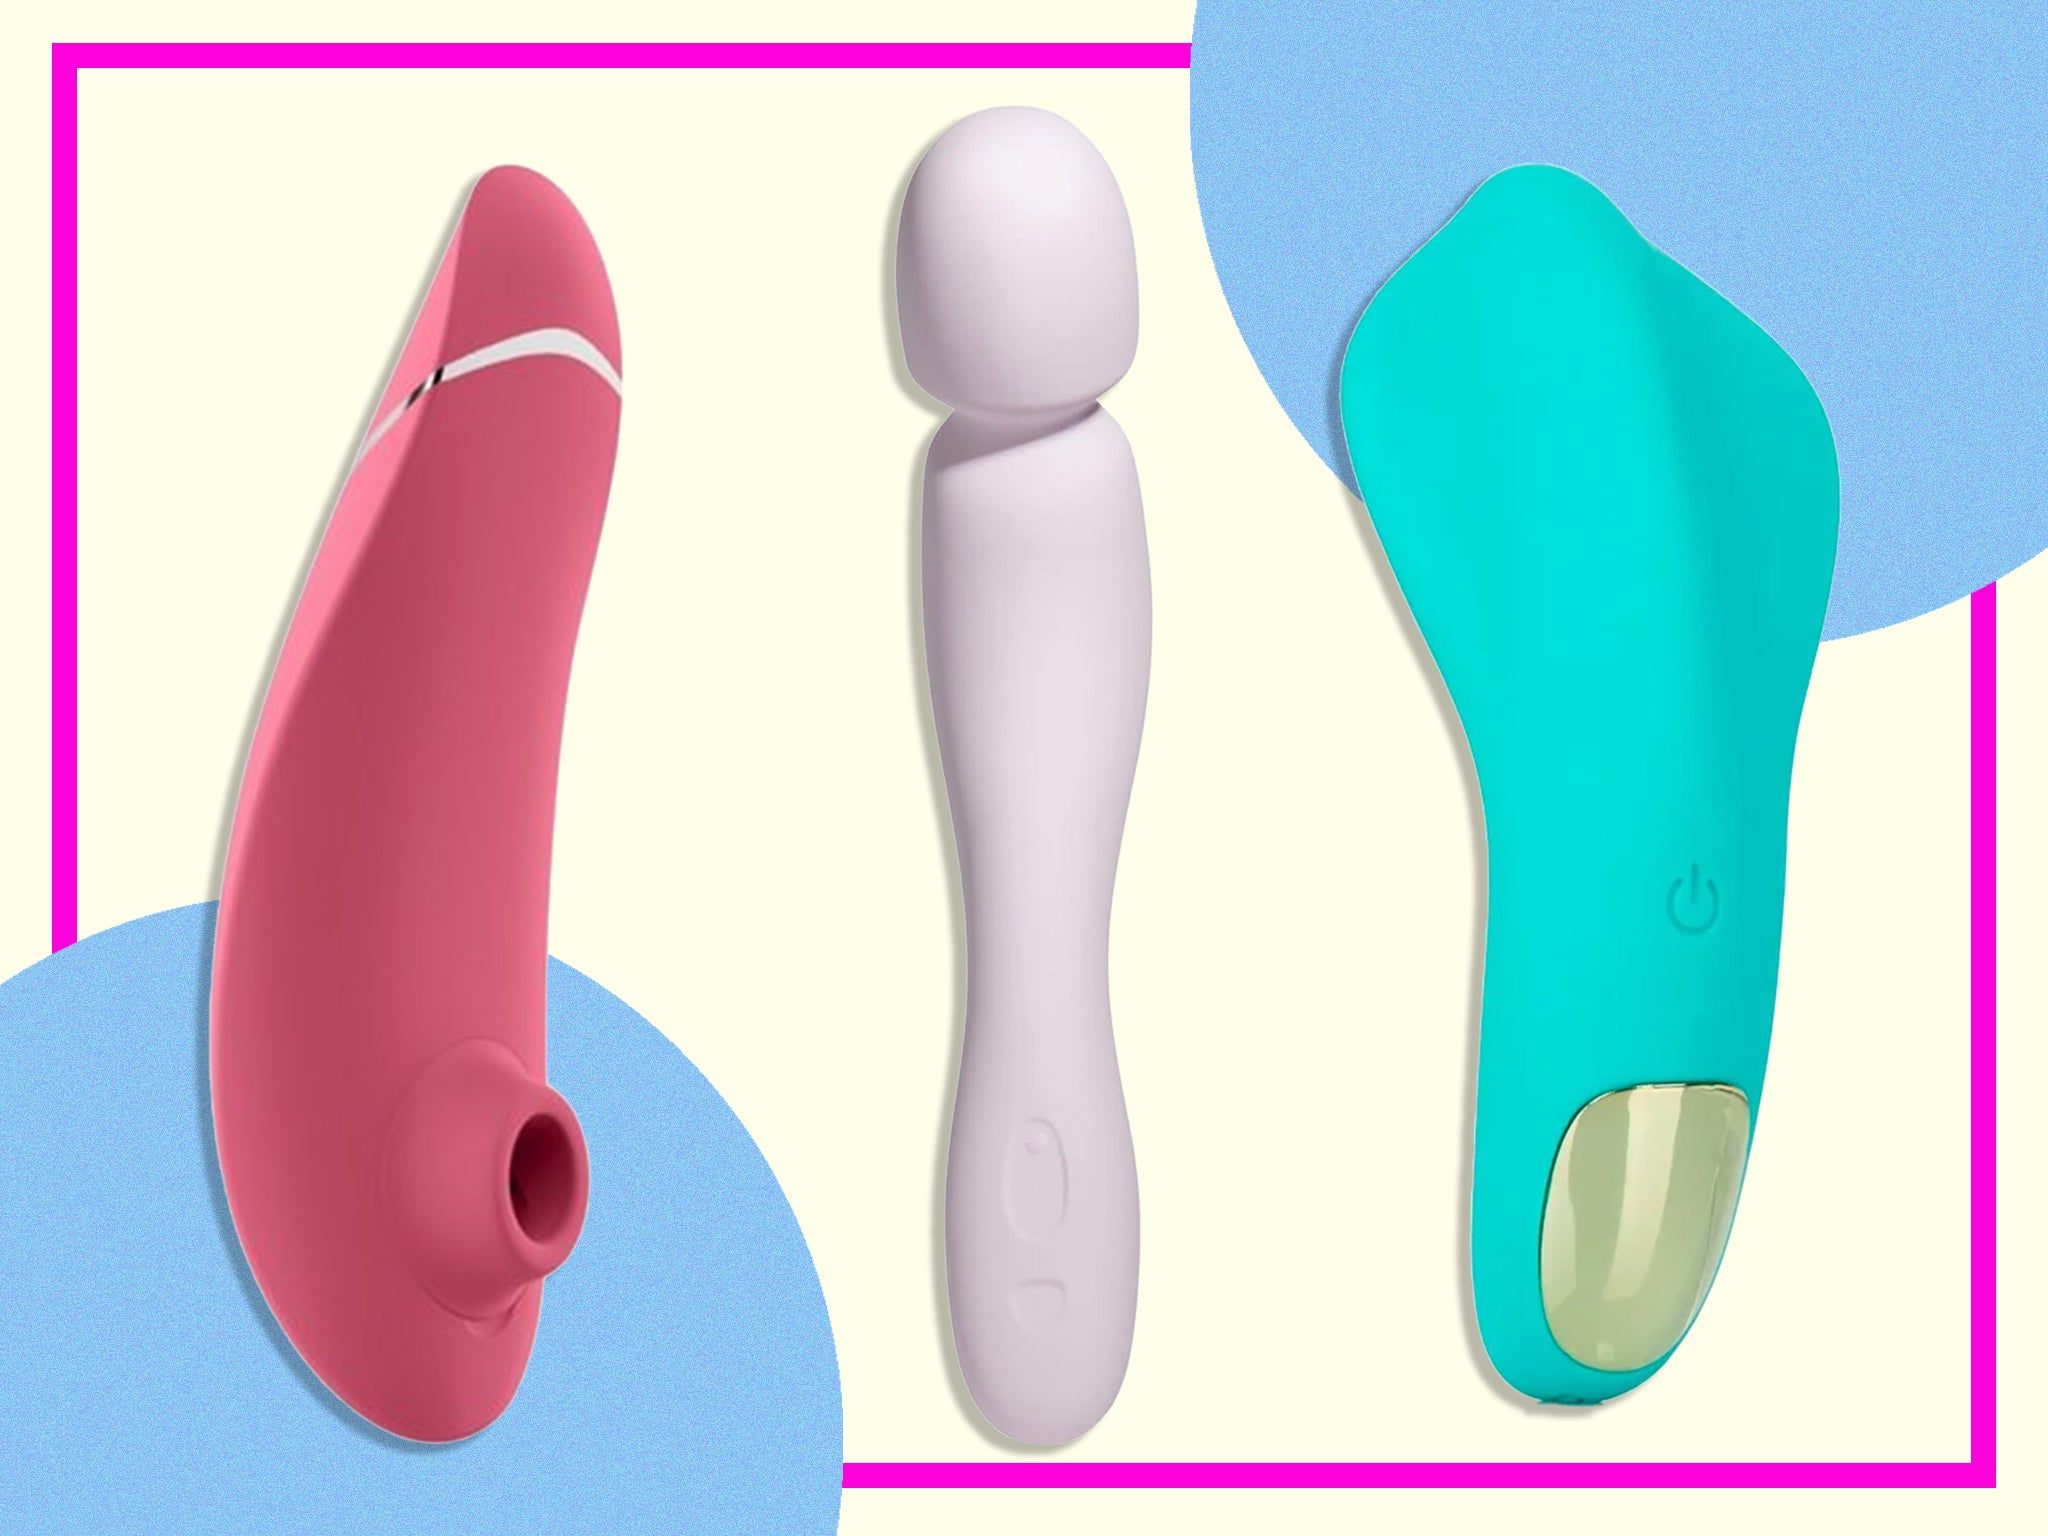 Best clit vibrators 2022 Magic wands, bullets, suction toys and more The Independent